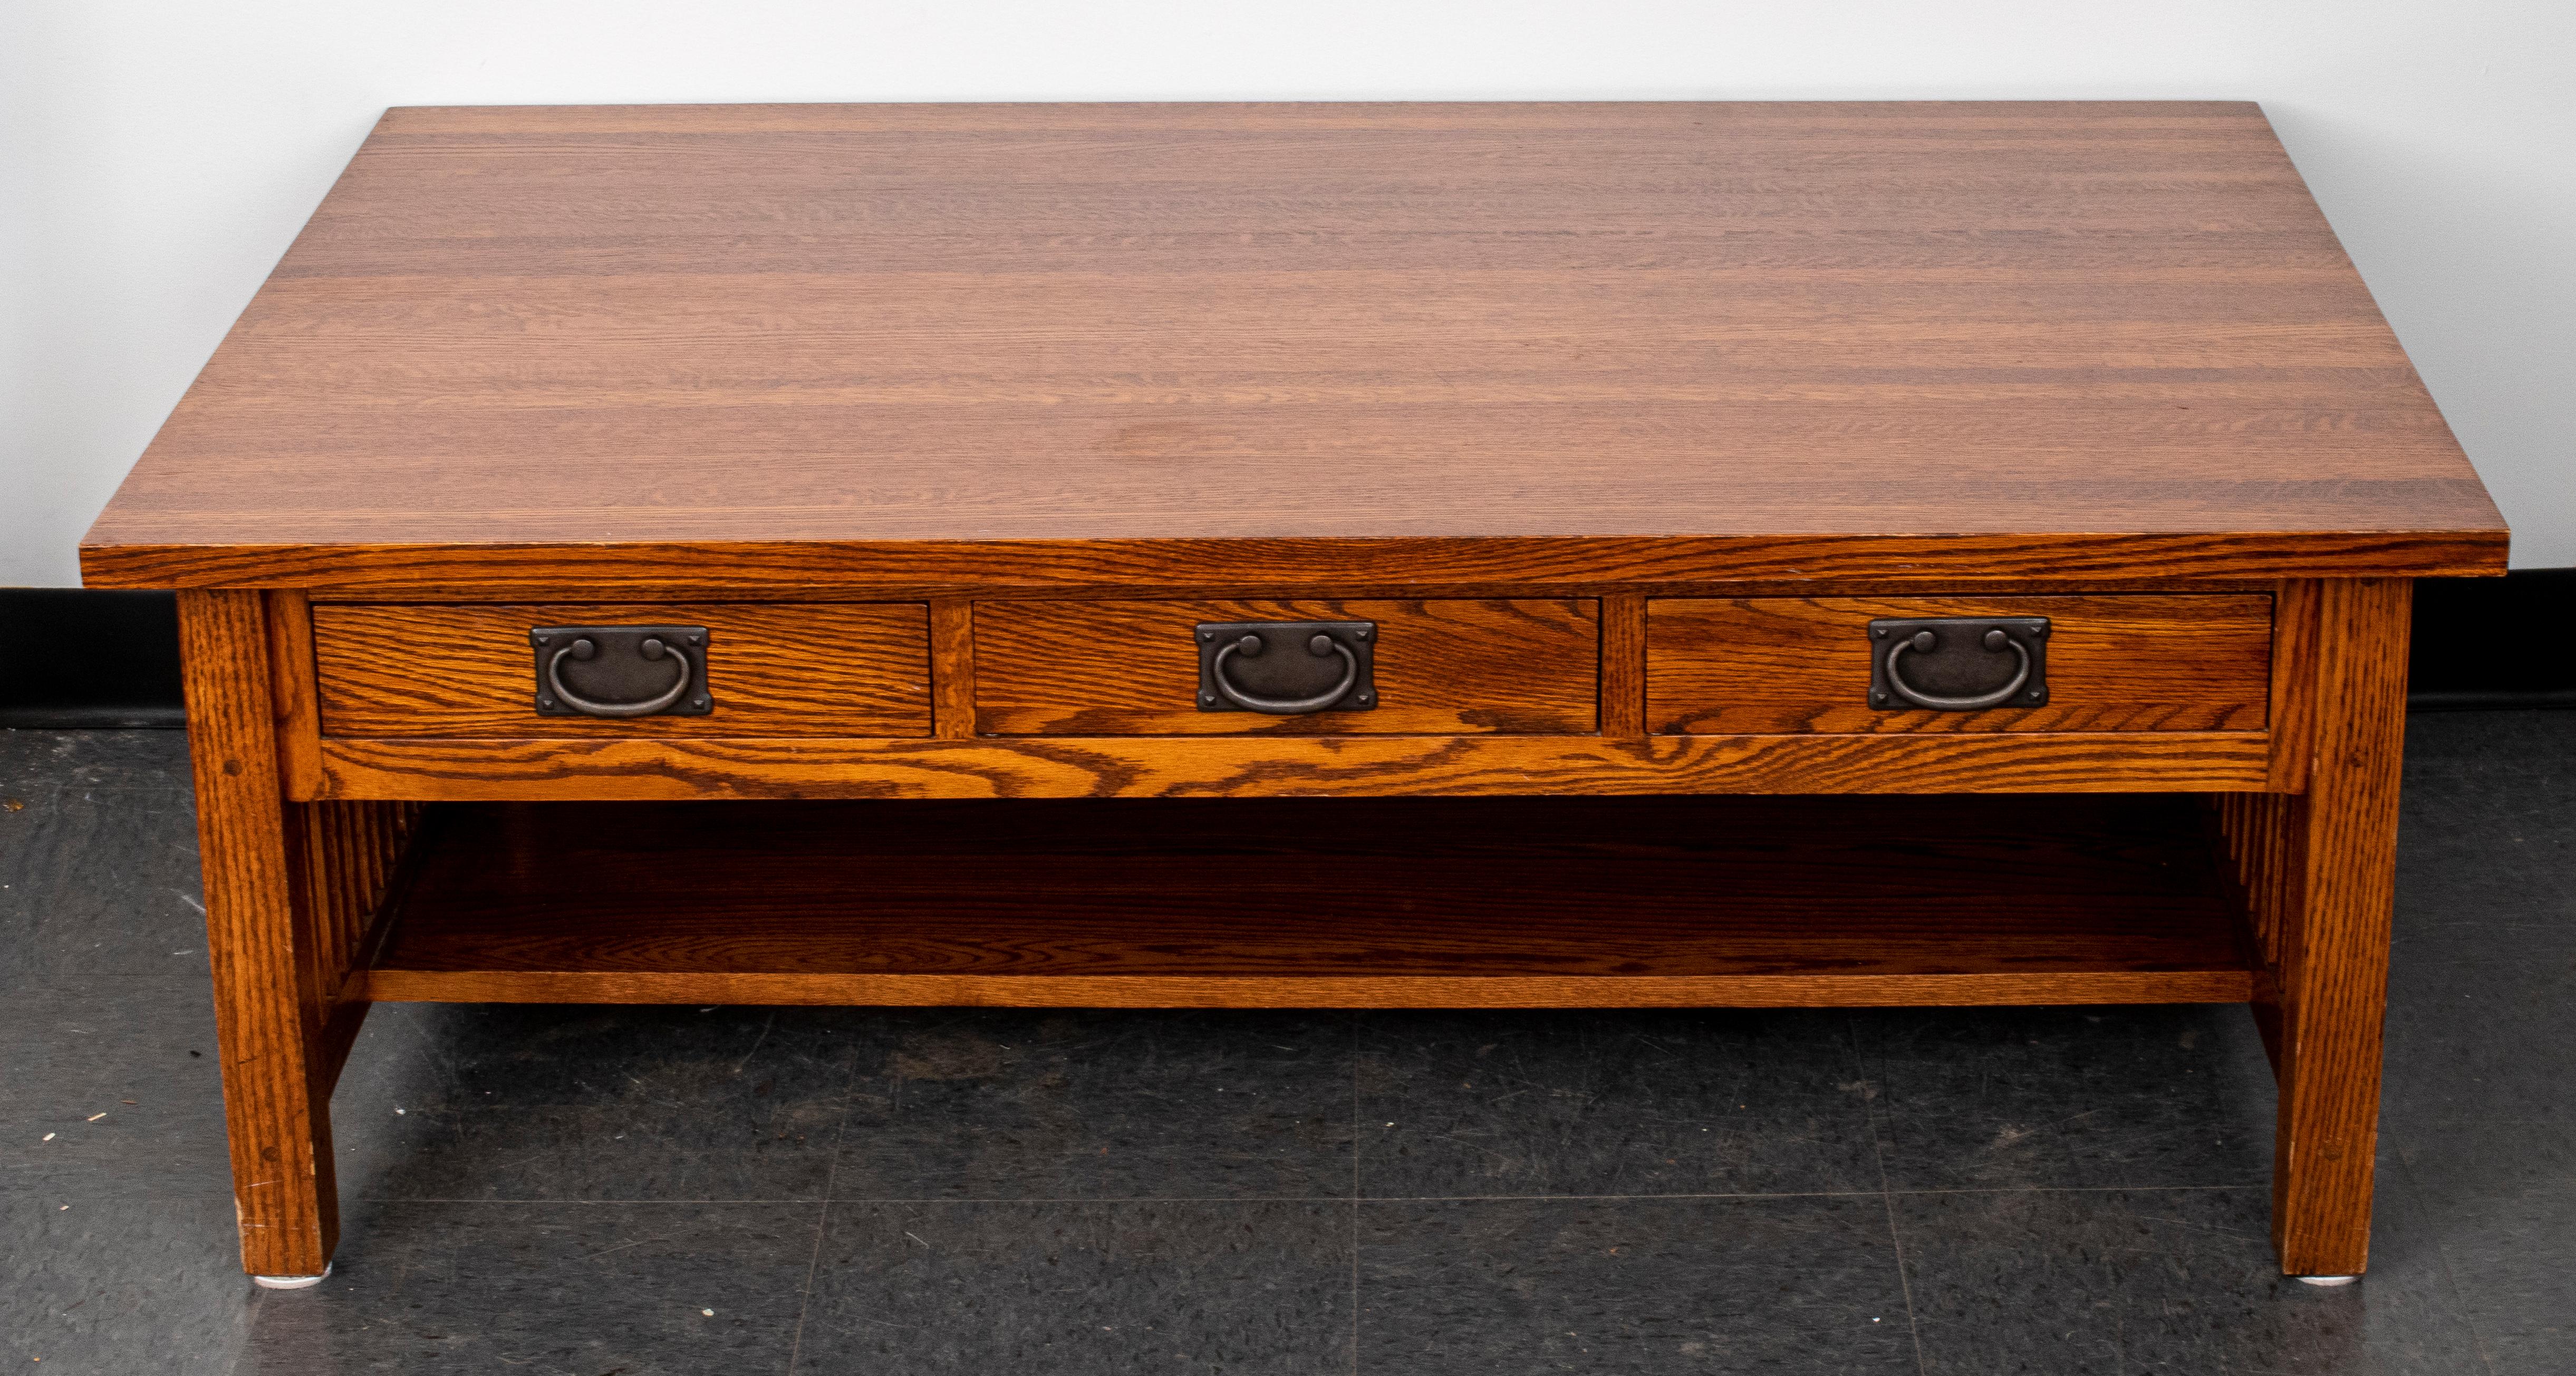 Arts and Crafts Stickley style coffee table with six drawers, wood. From a Rye, New York private collection. Measures: 18